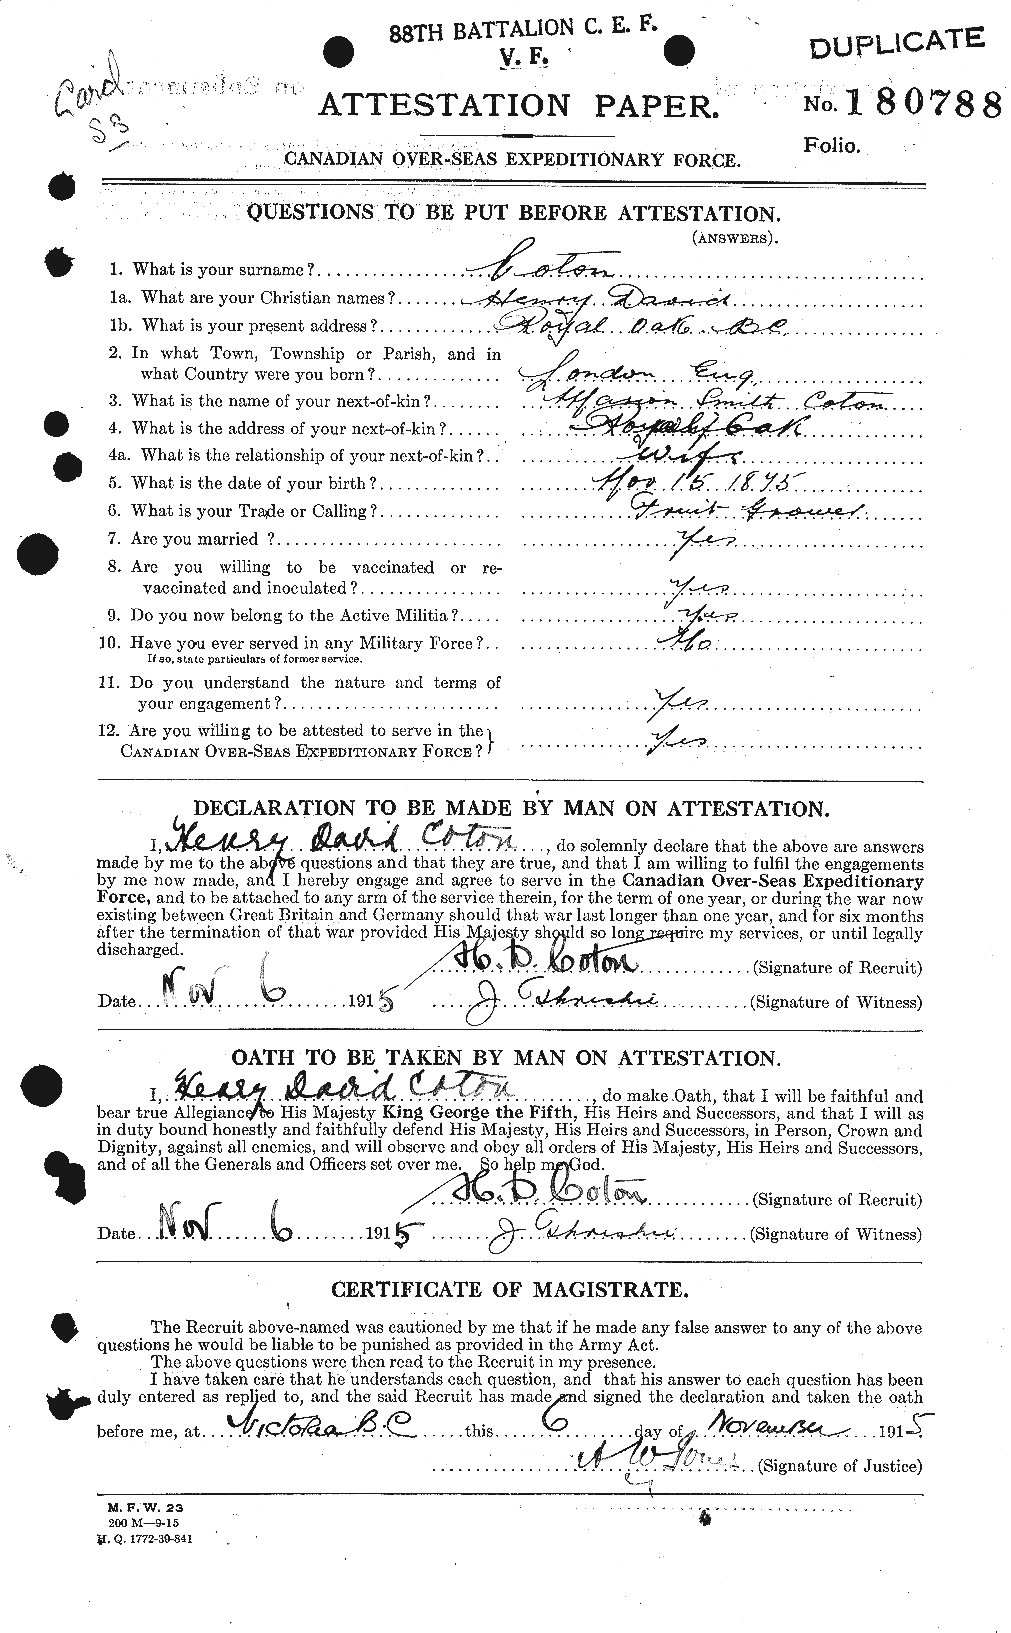 Personnel Records of the First World War - CEF 063137a